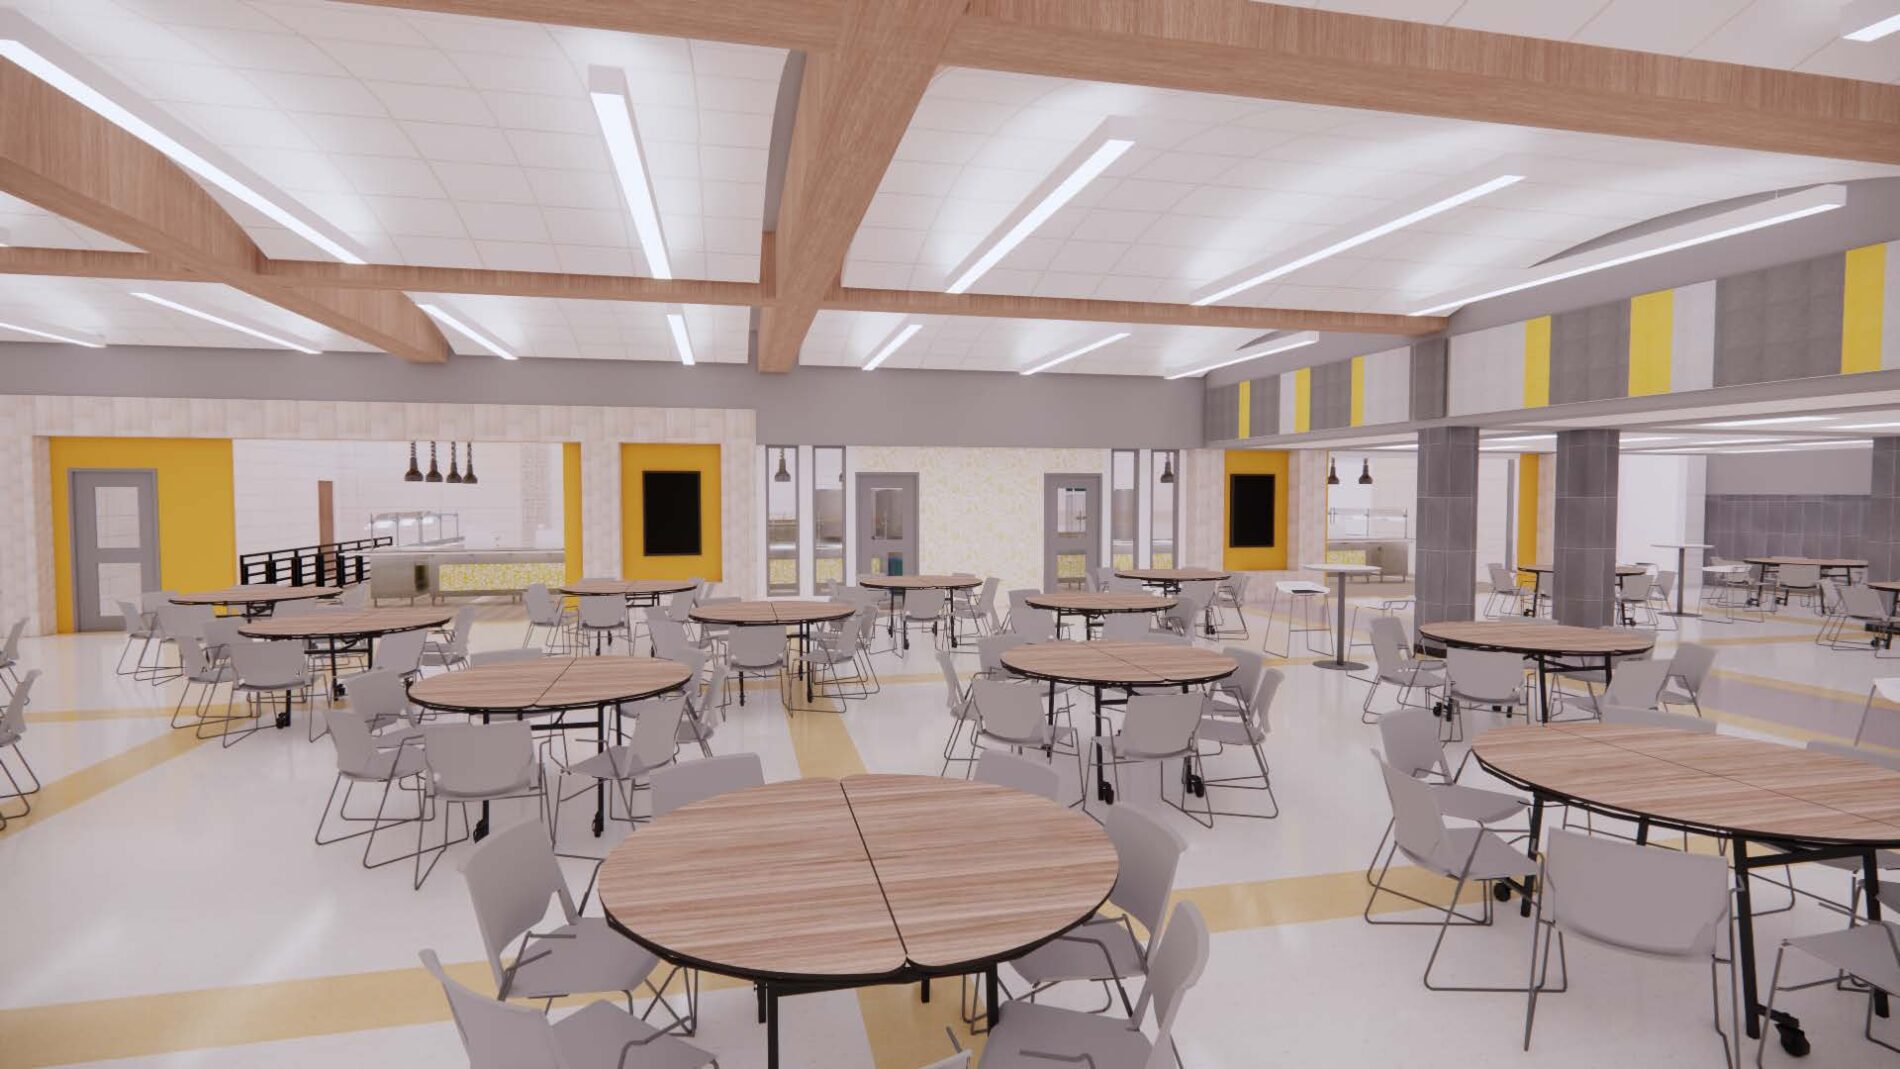 A rendering of the cafeteria at Plano ISD Williams High School